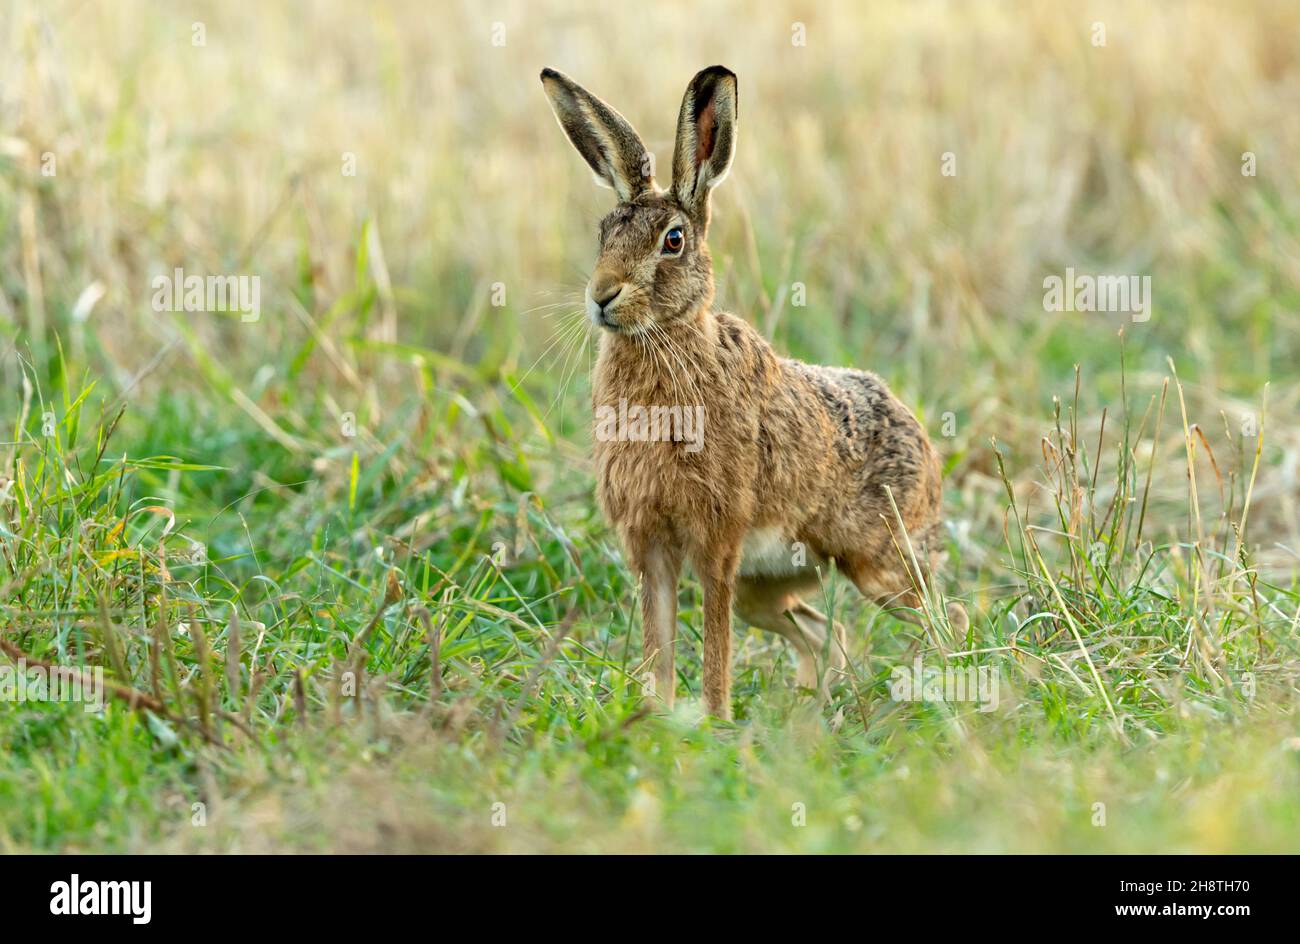 Close up of a large brown hare poised and ready to sprint off in natural agricultural field habitat.  Facing camera.  Space for copy.  Landscape Stock Photo